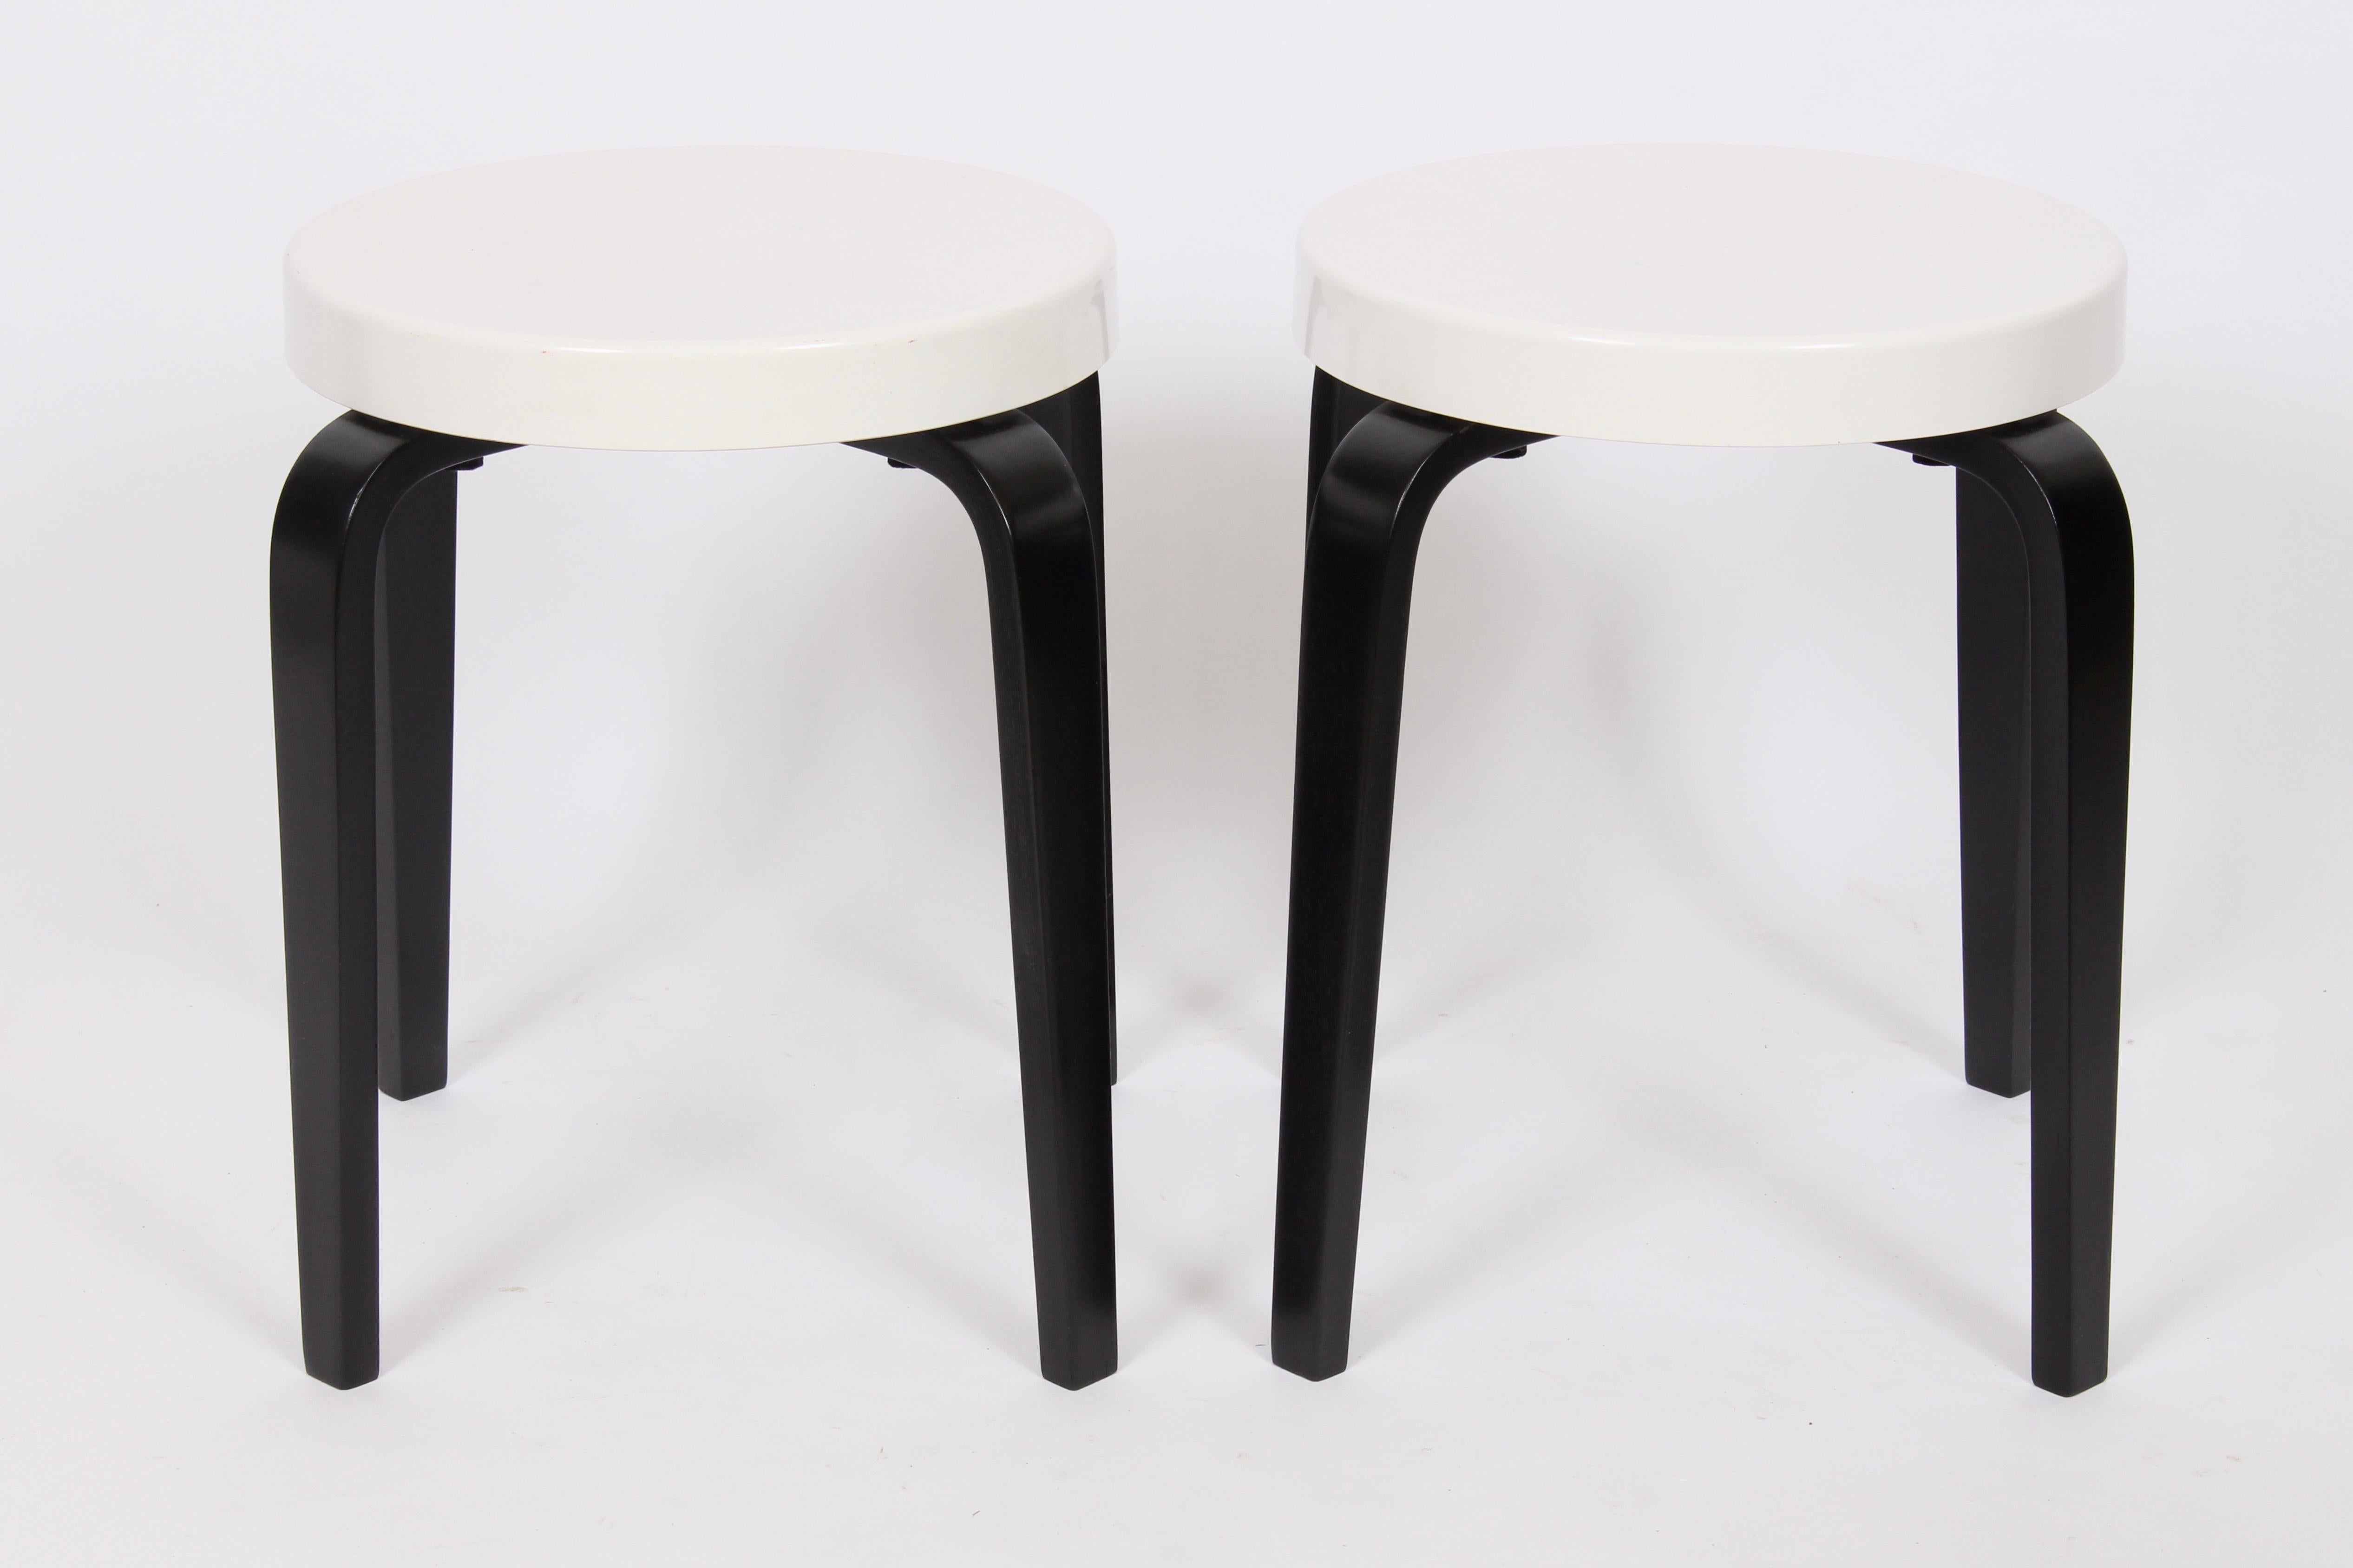 Pair of Thonet White and Black Bakelite Stacking Stools, 1930s For Sale 5